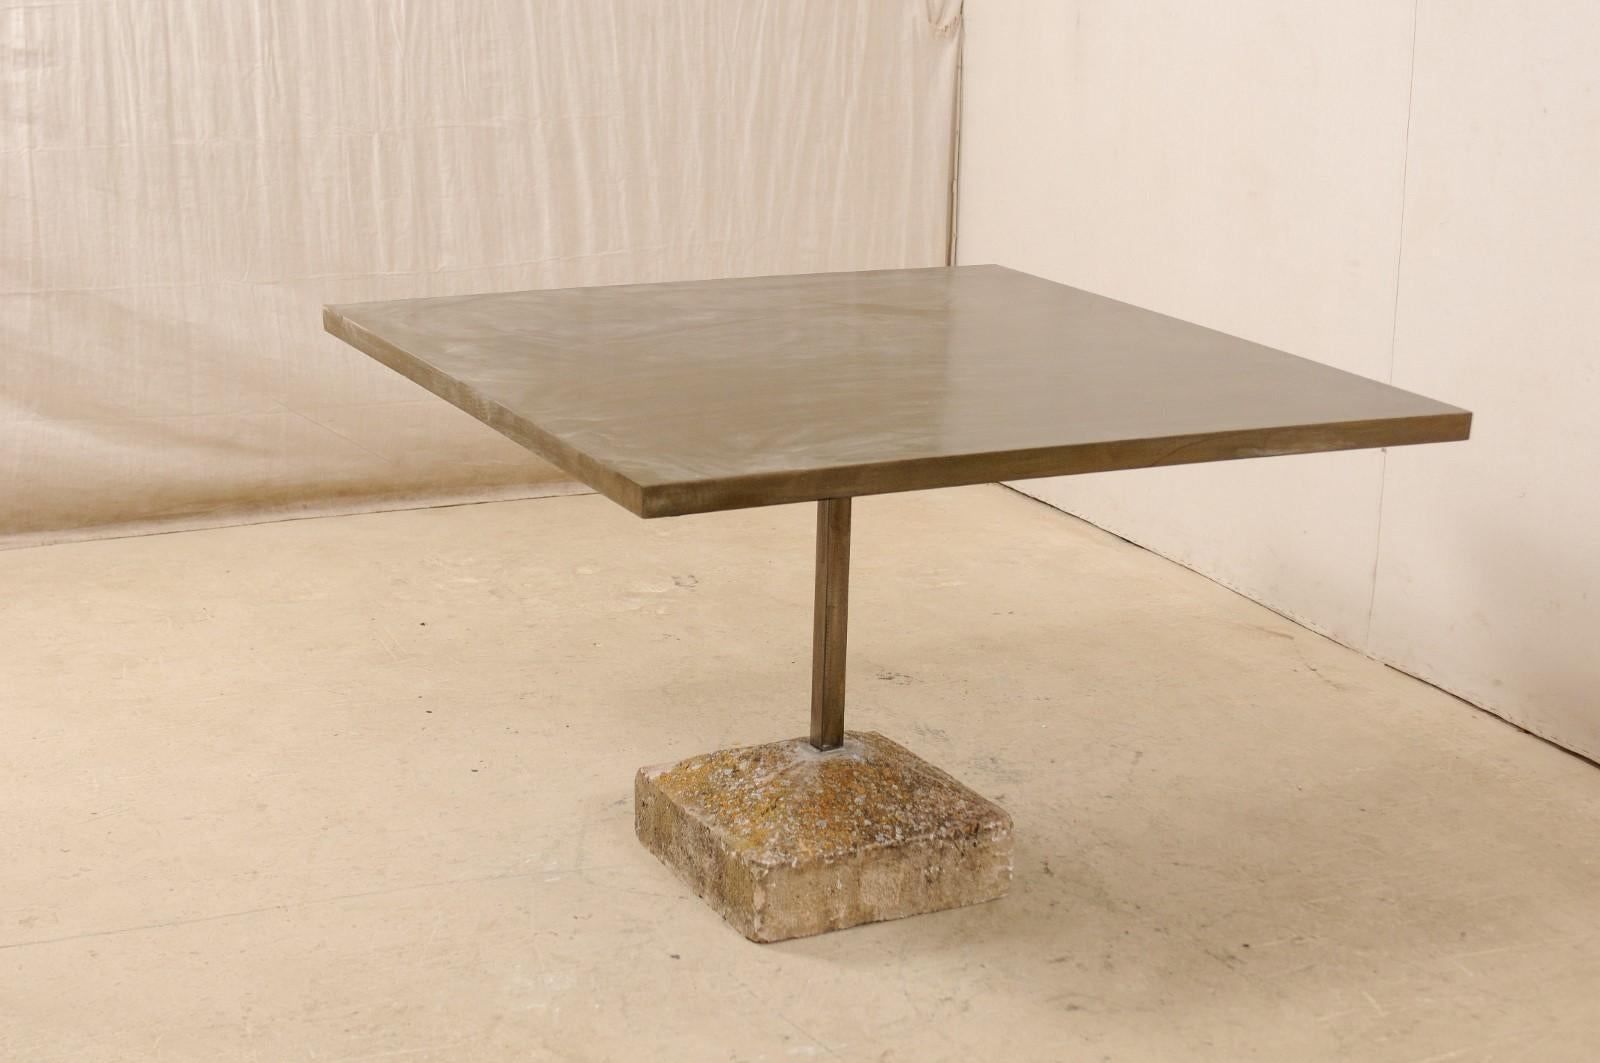 An artisan made custom 4 feet square table with an old Spanish plinth base. This table has been modernly designed in clean lines and features a patinated iron top, square in shape, with a squared iron central column which terminates into an old